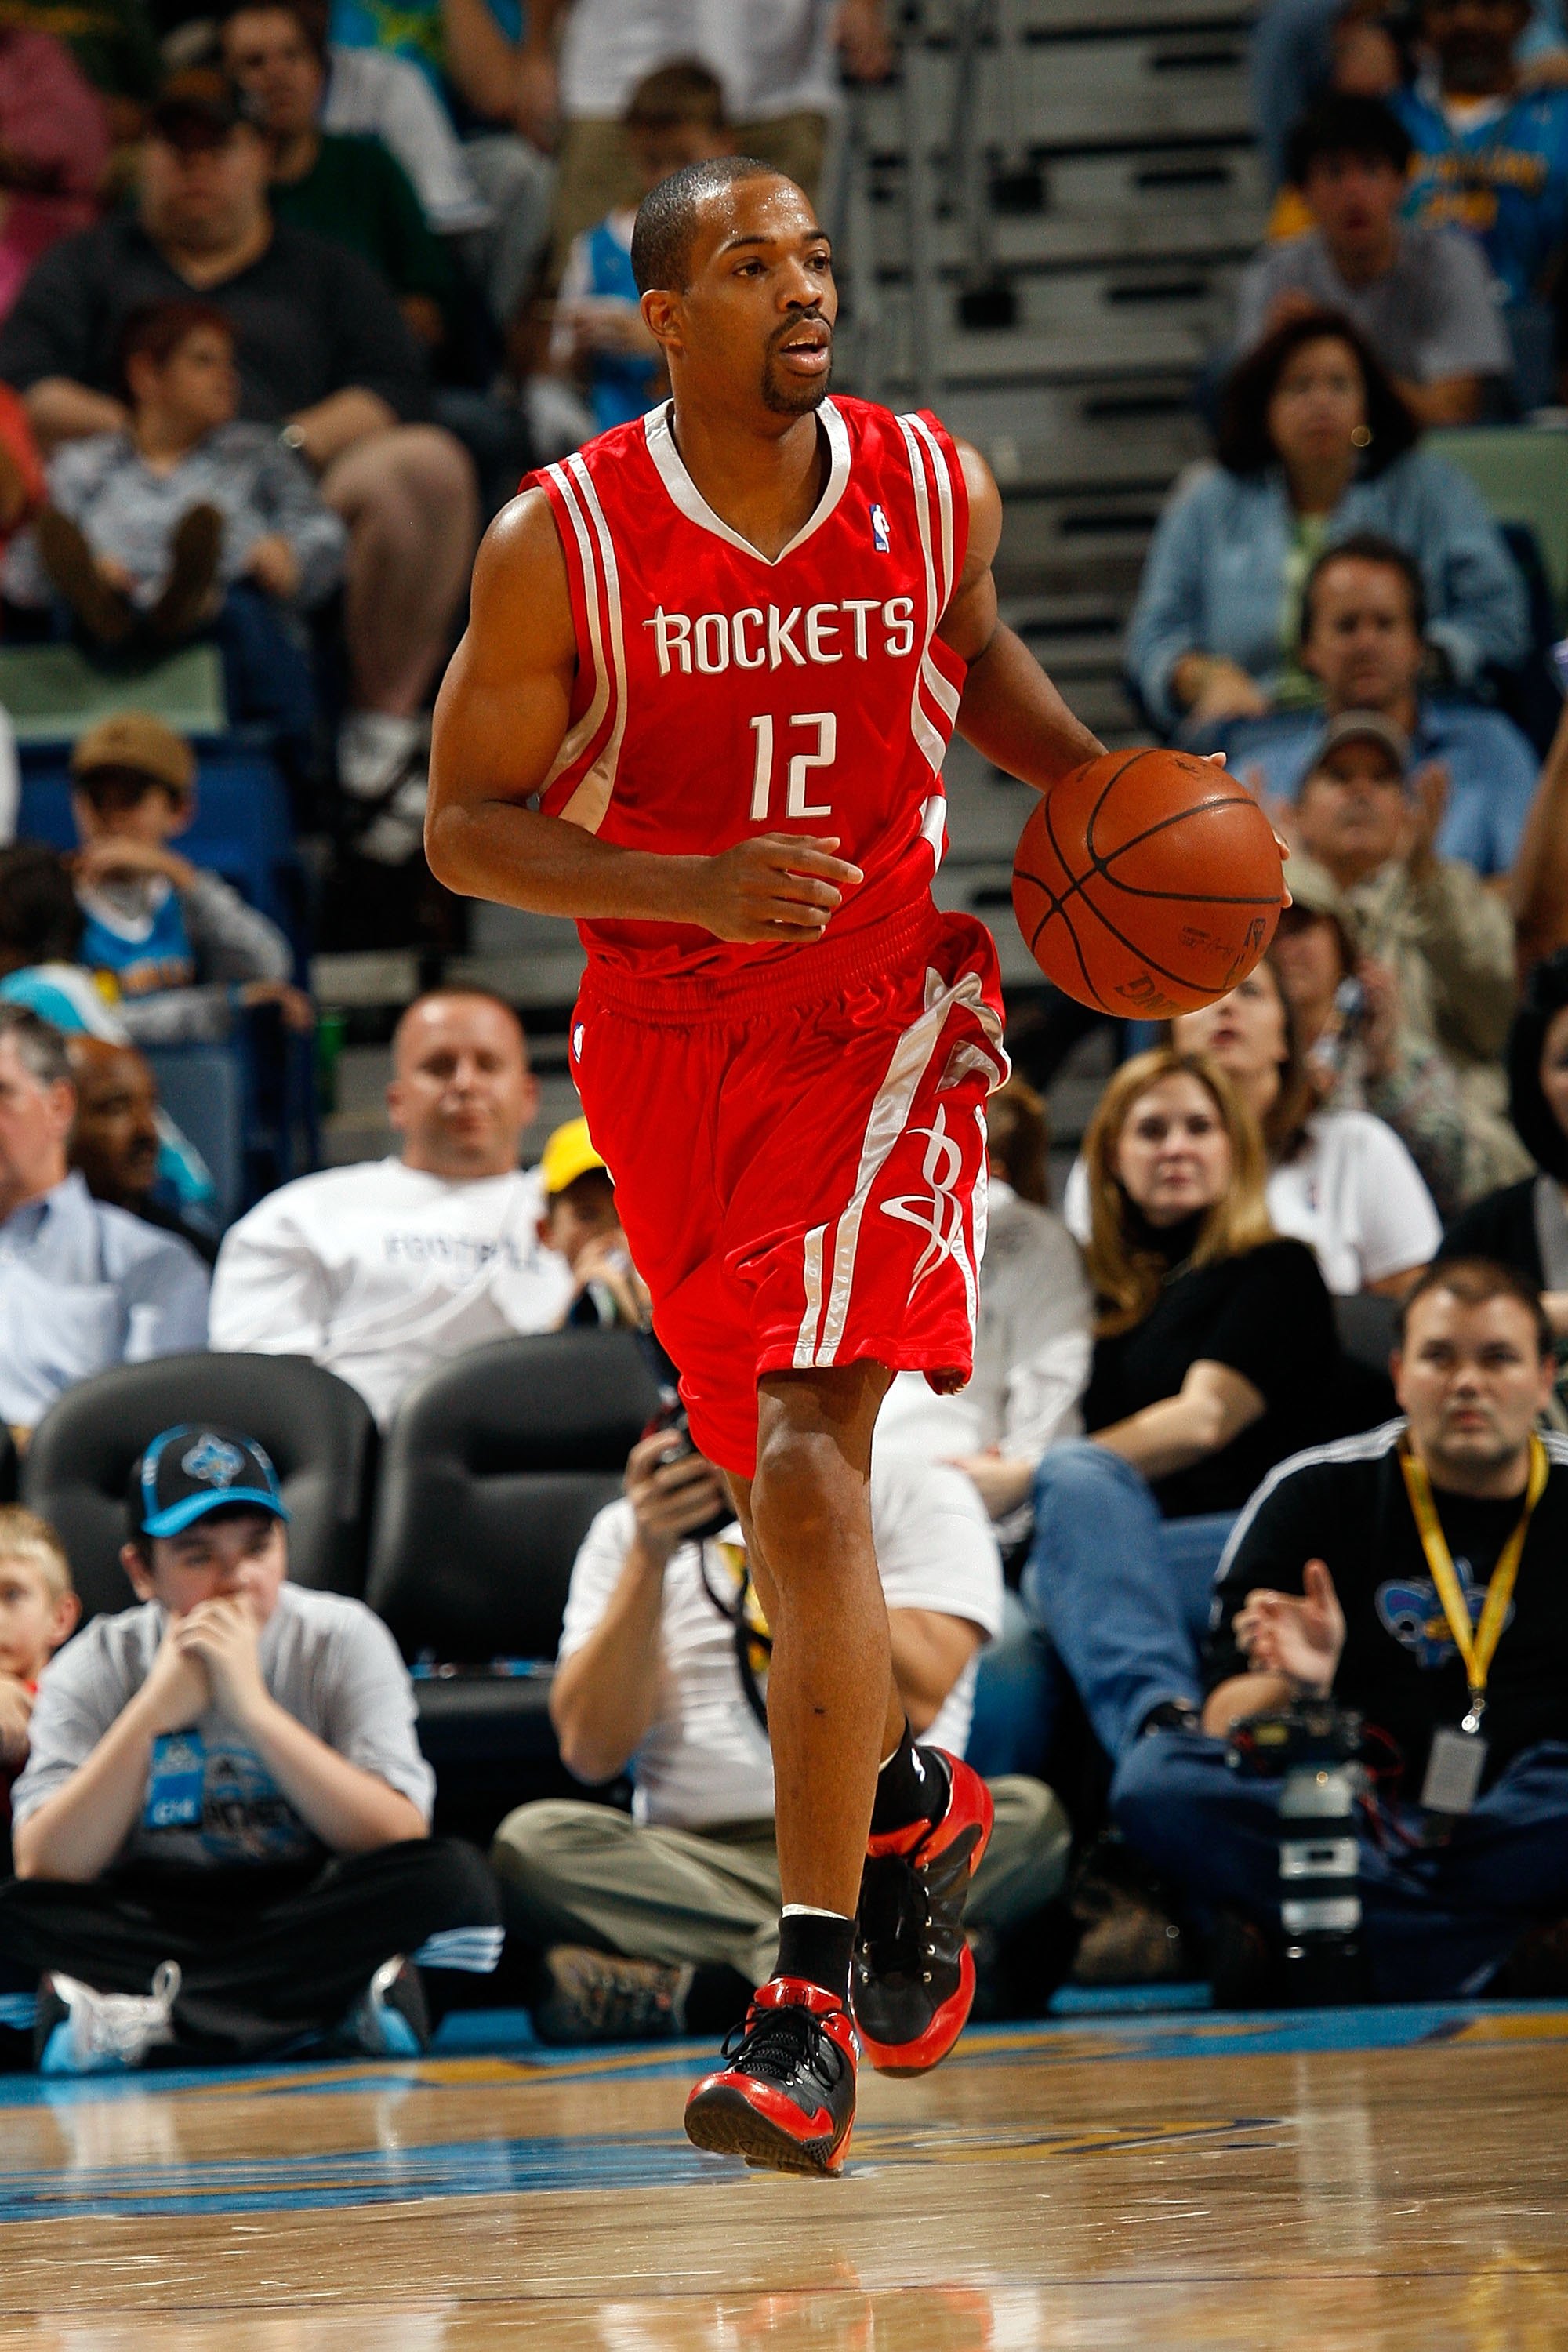 Robert Horry of the Houston Rockets drives to the basket during a